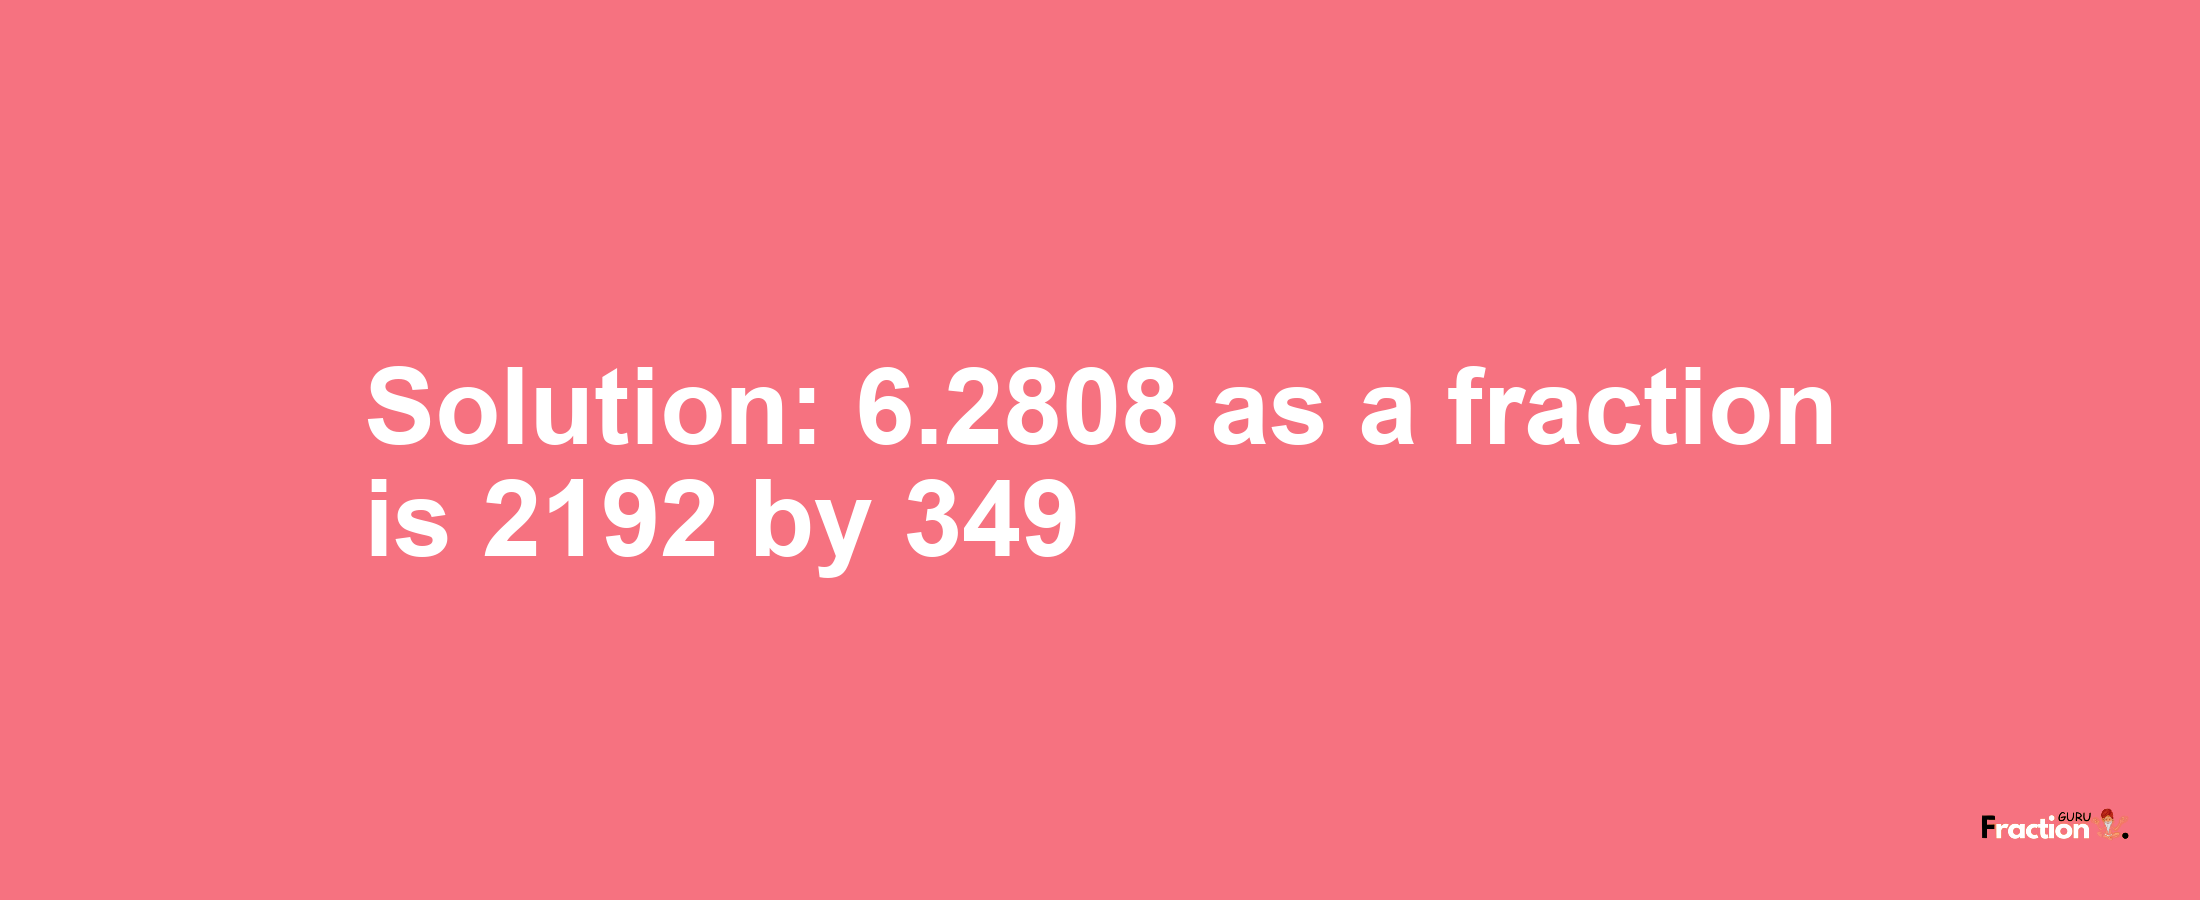 Solution:6.2808 as a fraction is 2192/349